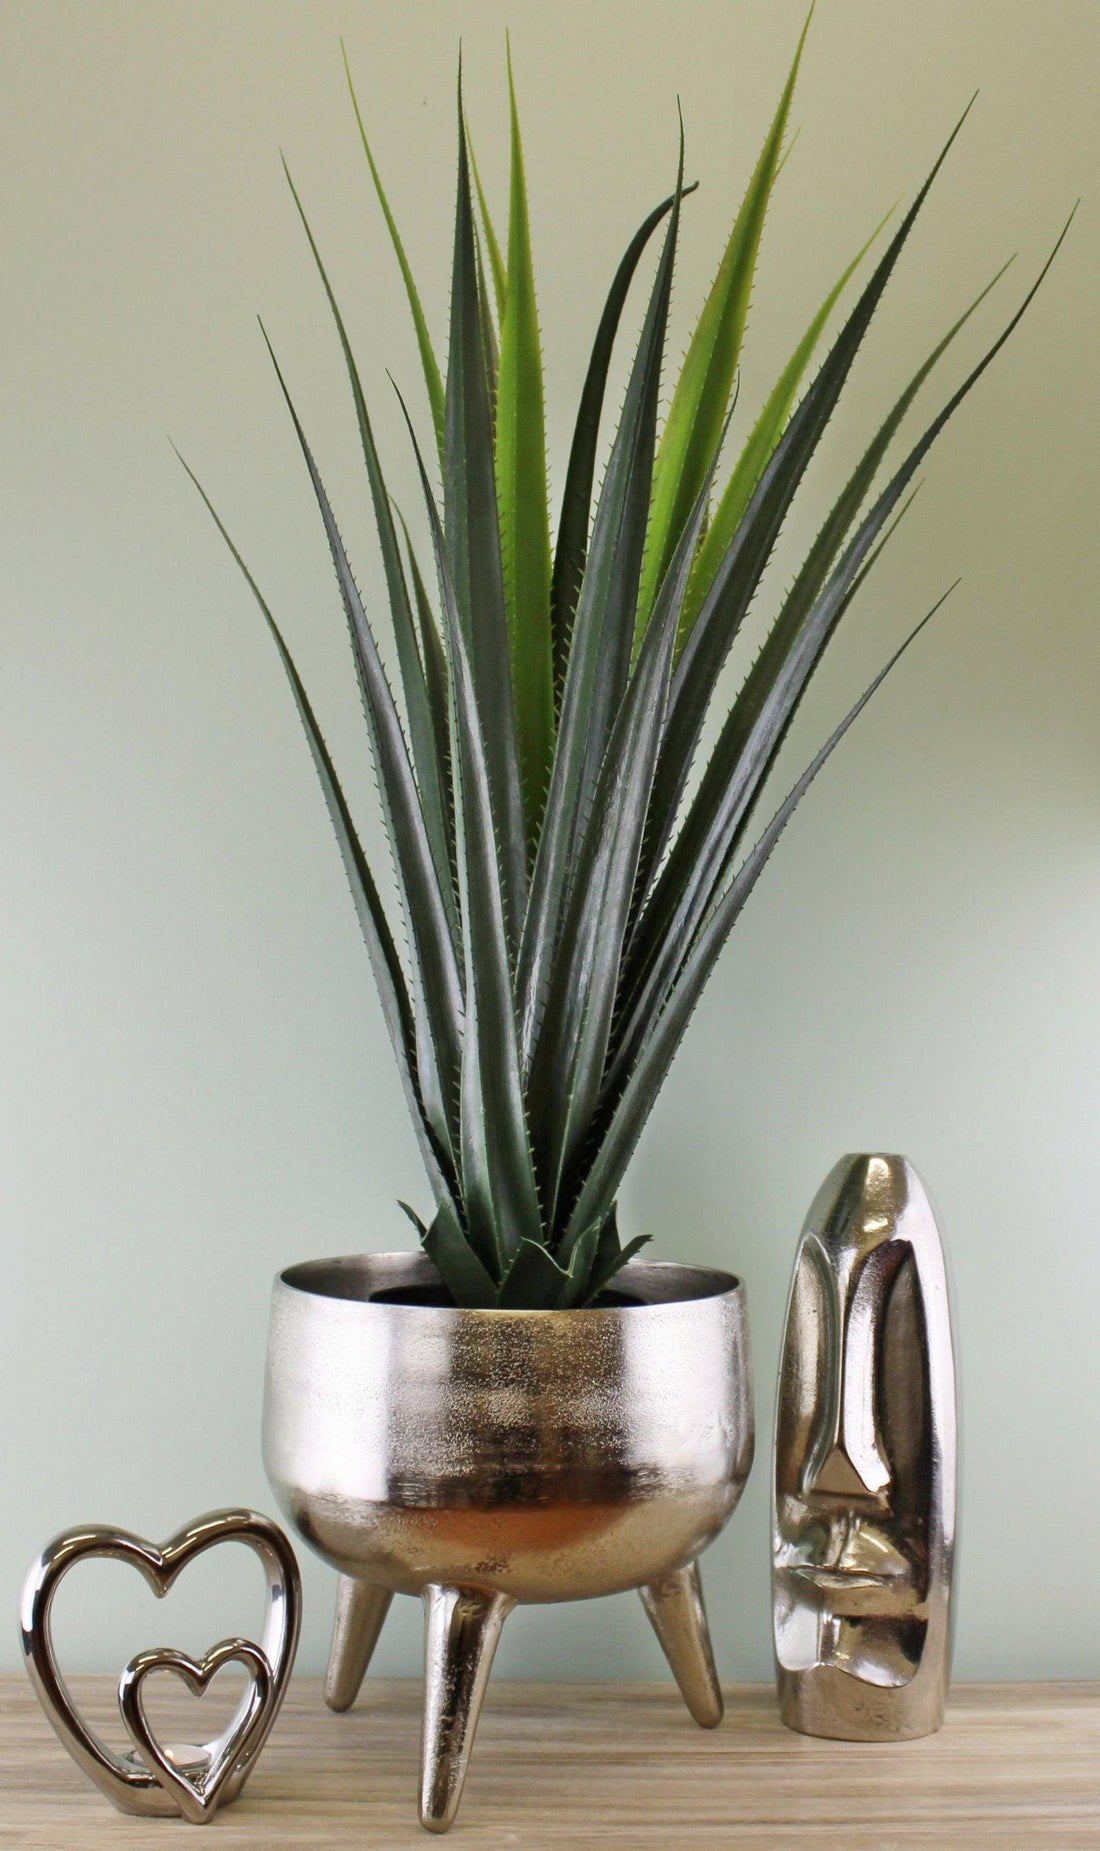 Silver Metal Planter/Bowl With Feet, 27cm - £88.99 - Planters, Vases & Plant Stands 